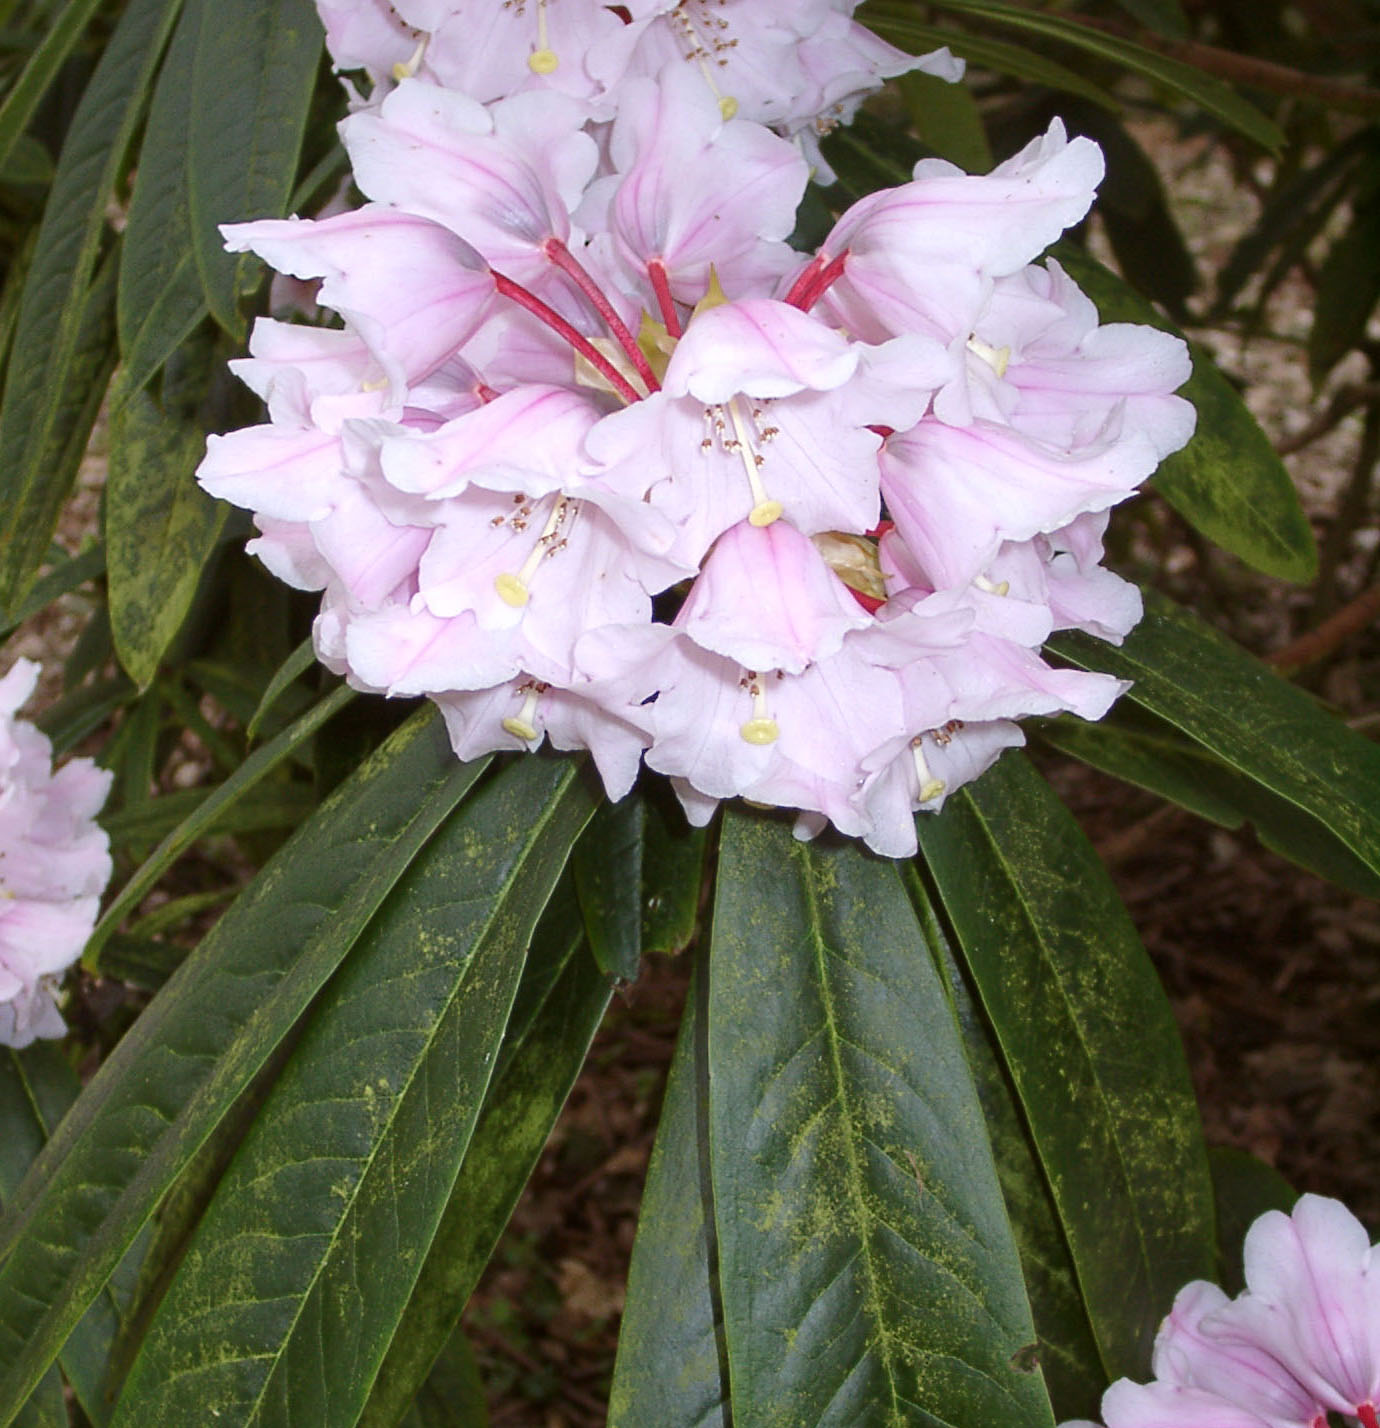 CALOPHYTUM Rhododendron Larger Species Rhododendrons